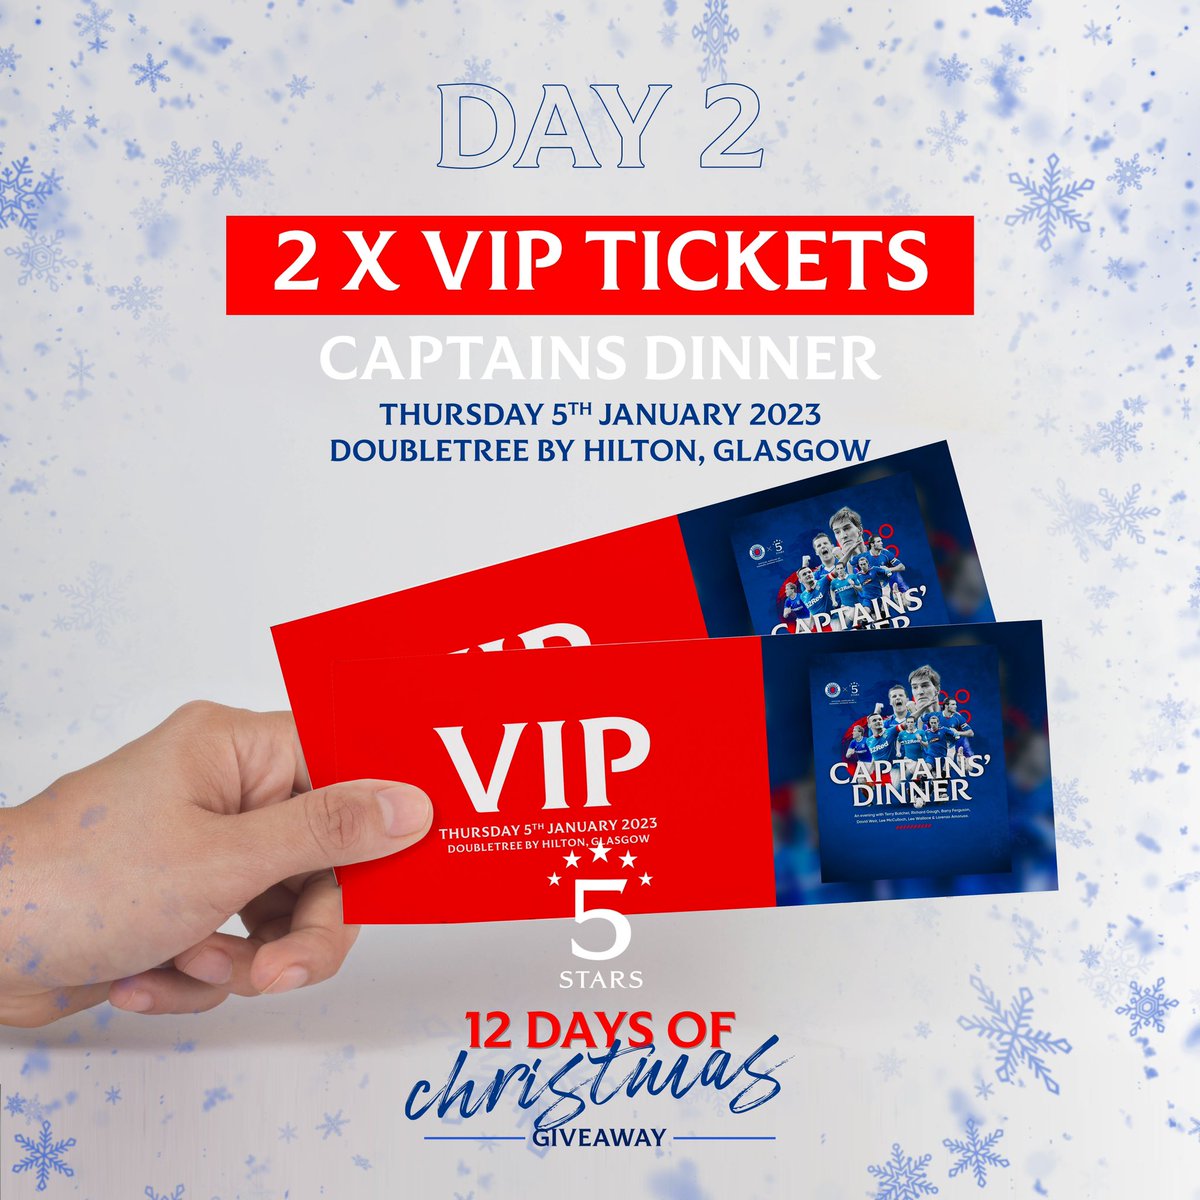 🔴⚪️🔵 12 Days of Christmas Giveaway - Day 2 🔴⚪️⚪️ We’re giving you the chance to #Win 2 VIP Tickets to the Captains Dinner at Doubletree by Hilton on Thursday 5th January. All you have to do: 🔴 Like this post ⚪️ Tag 2 friends in the comments 🔵 Retweet